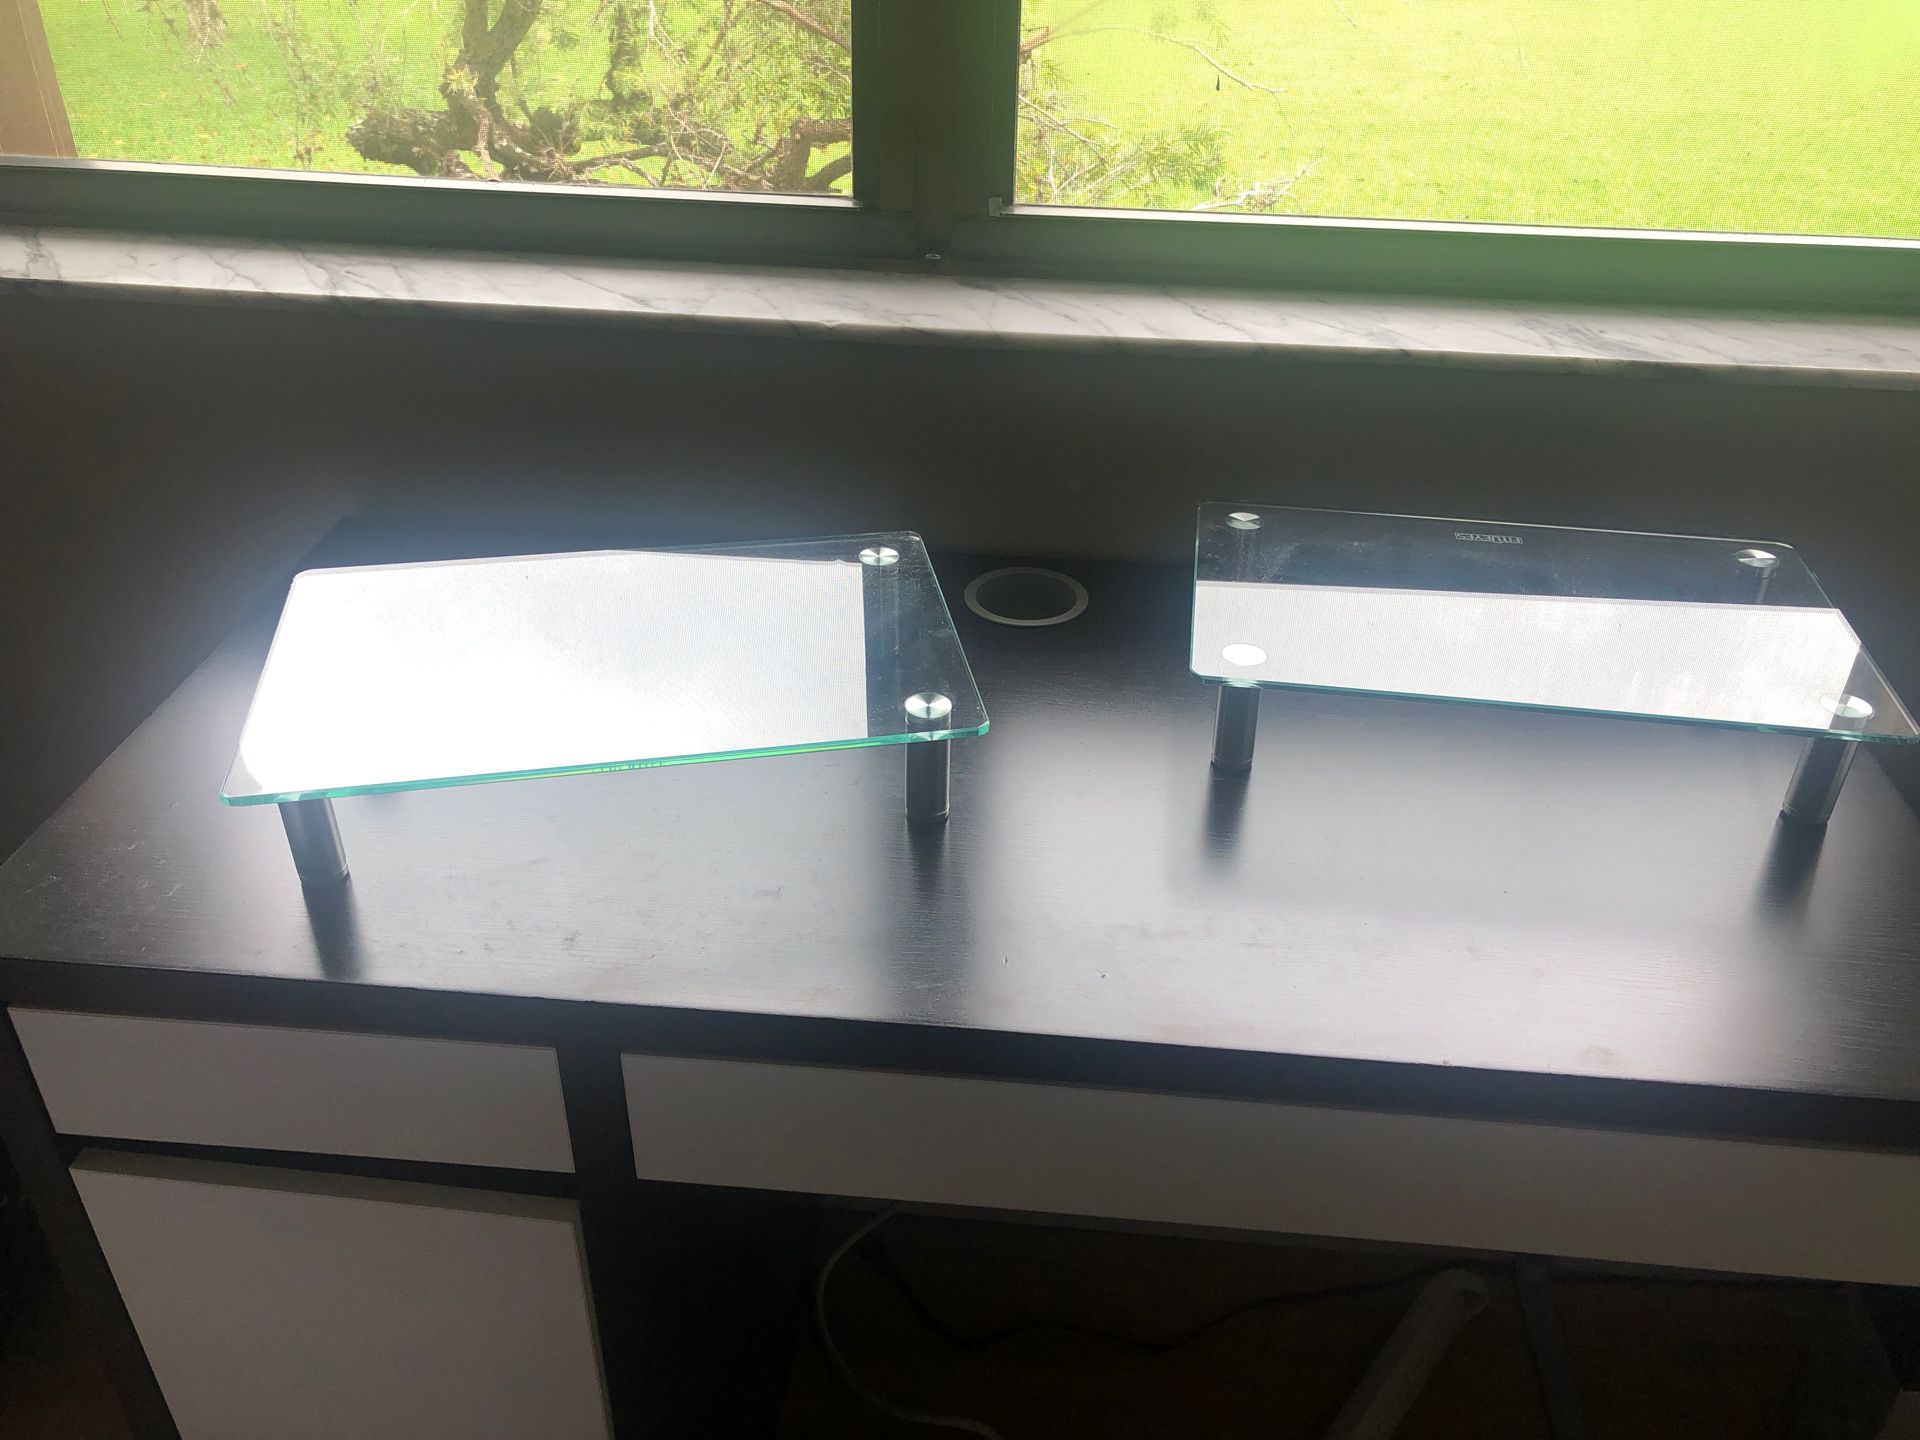 Computer monitor stand